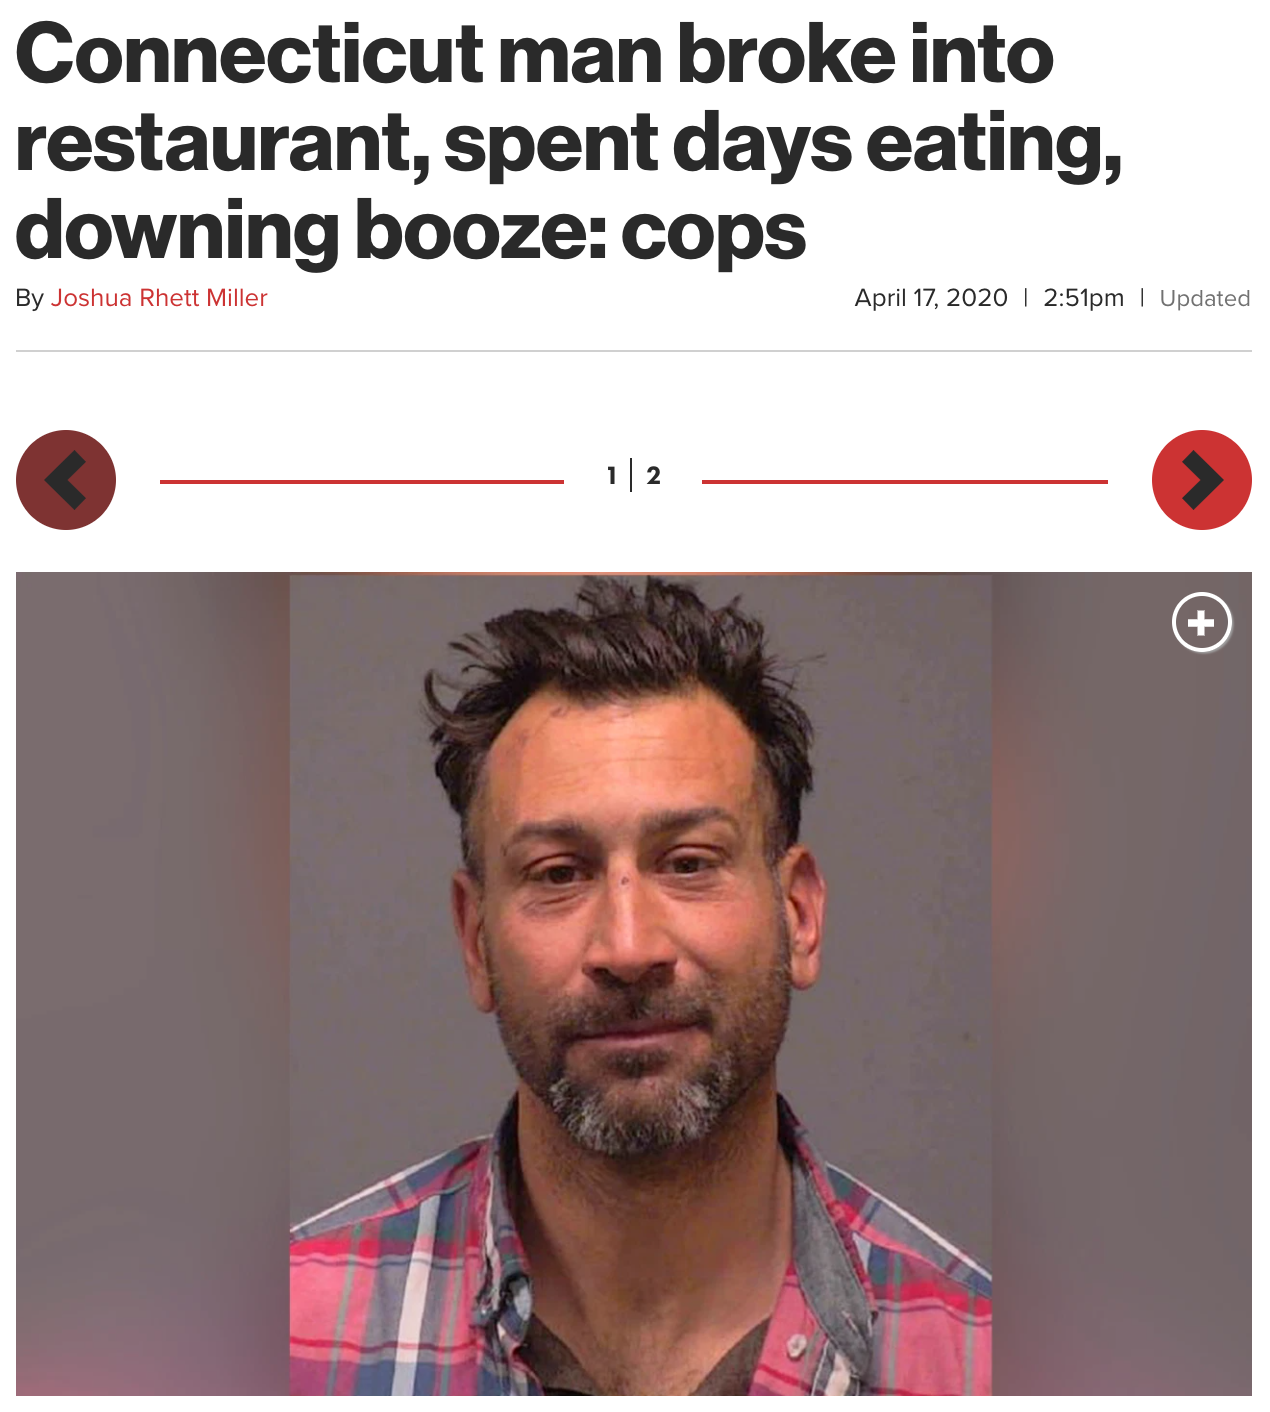 Connecticut man broke into restaurant, spent days eating, downing booze cops